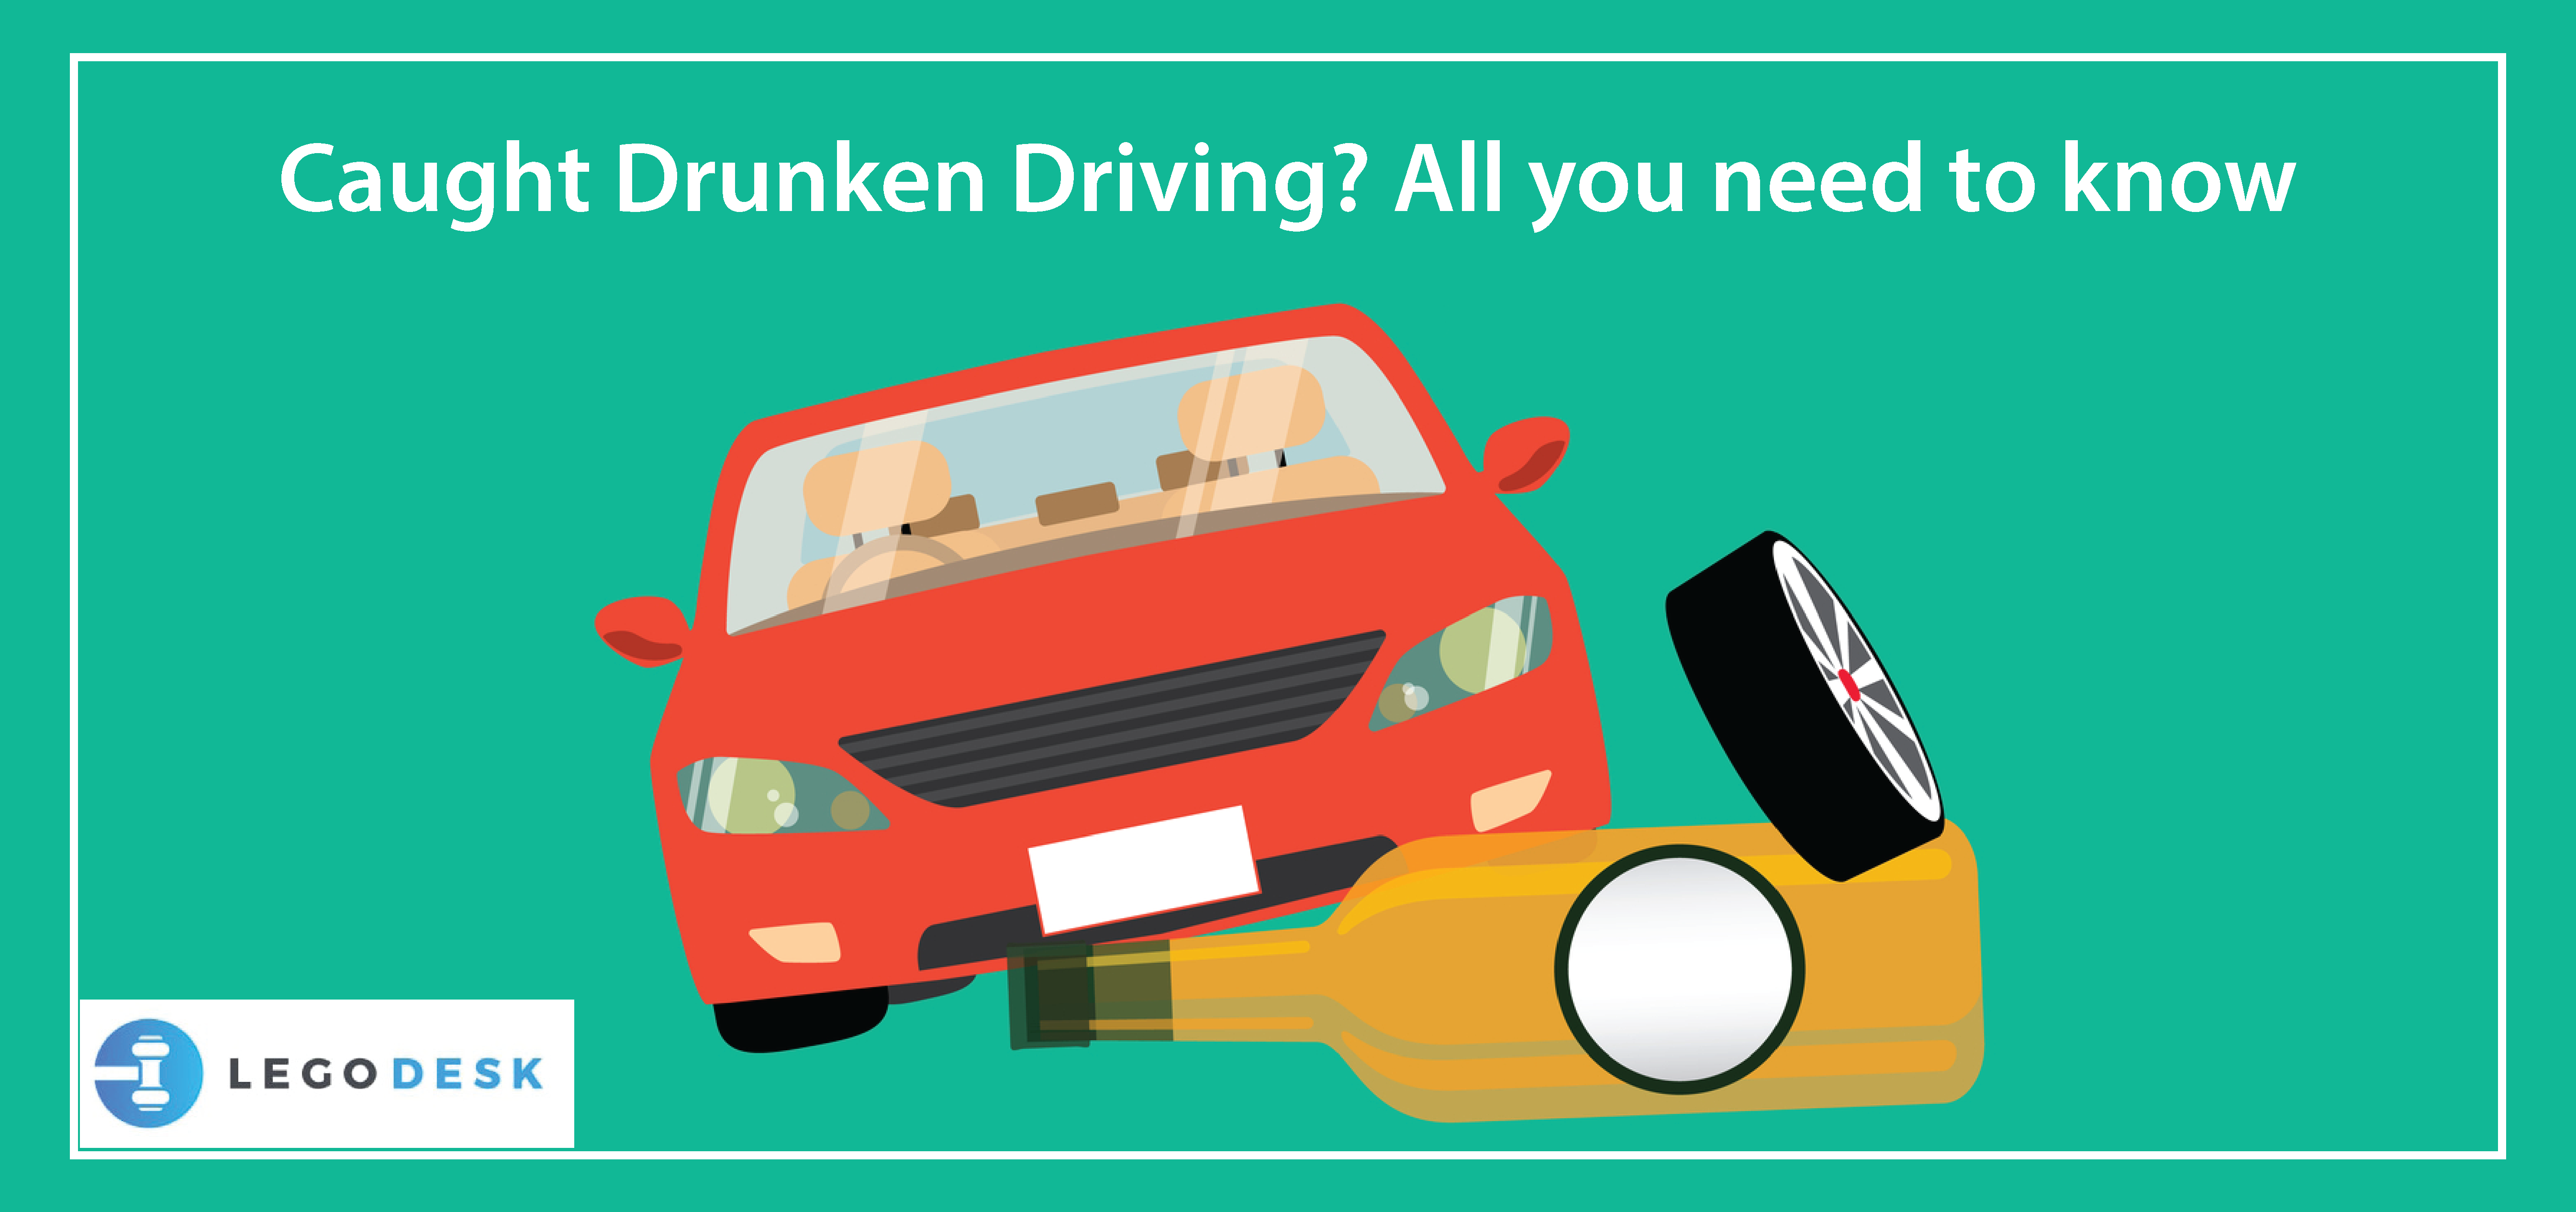 Caught Drunken Driving? All you need to know